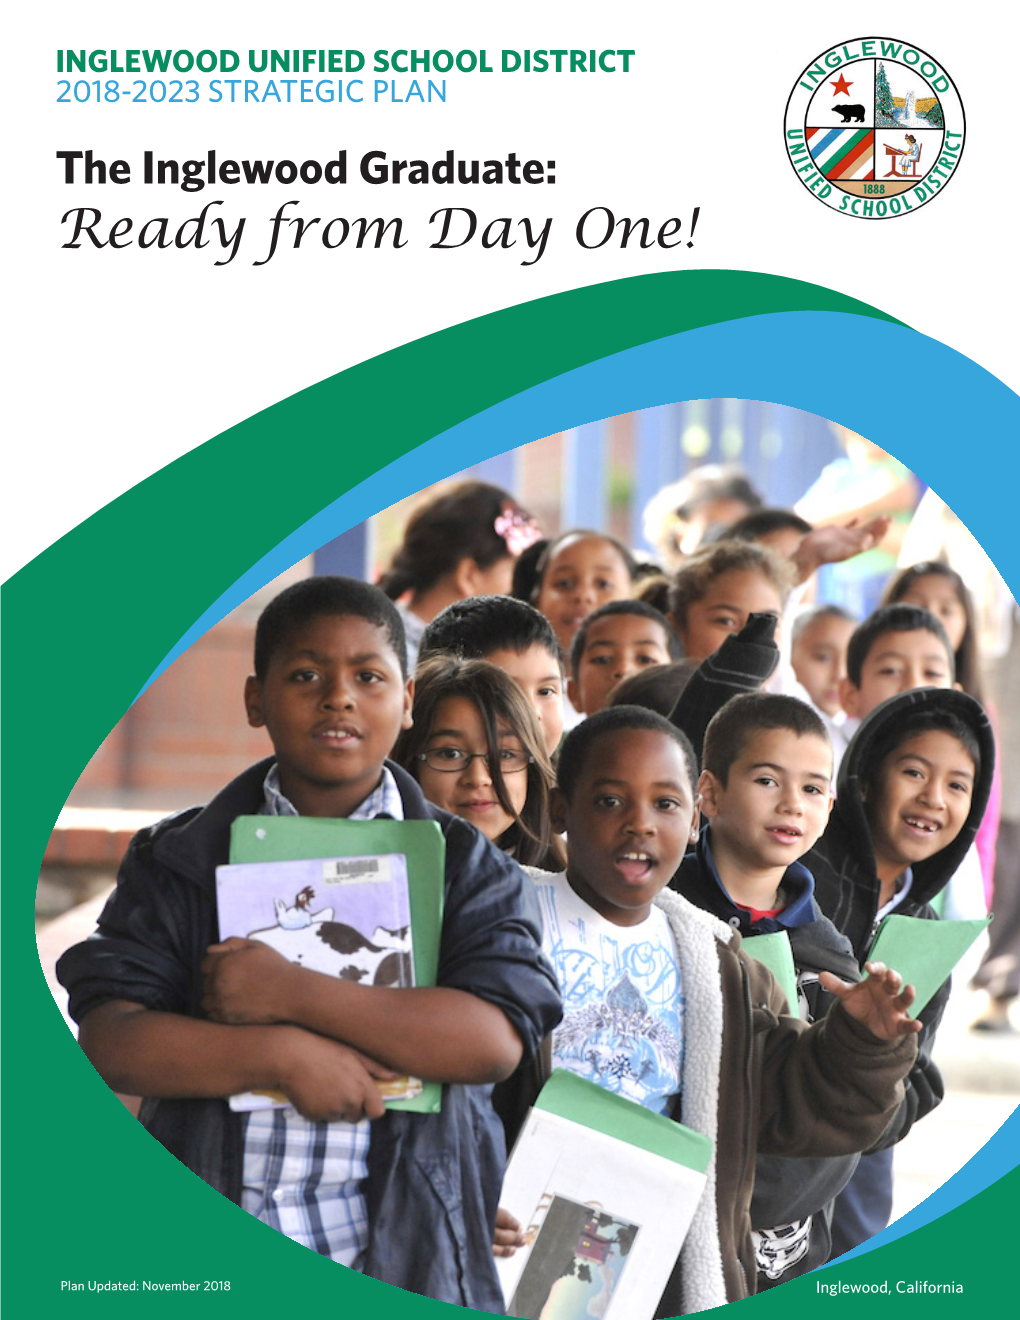 INGLEWOOD UNIFIED SCHOOL DISTRICT 2018-2023 STRATEGIC PLAN the Inglewood Graduate: Ready from Day One!